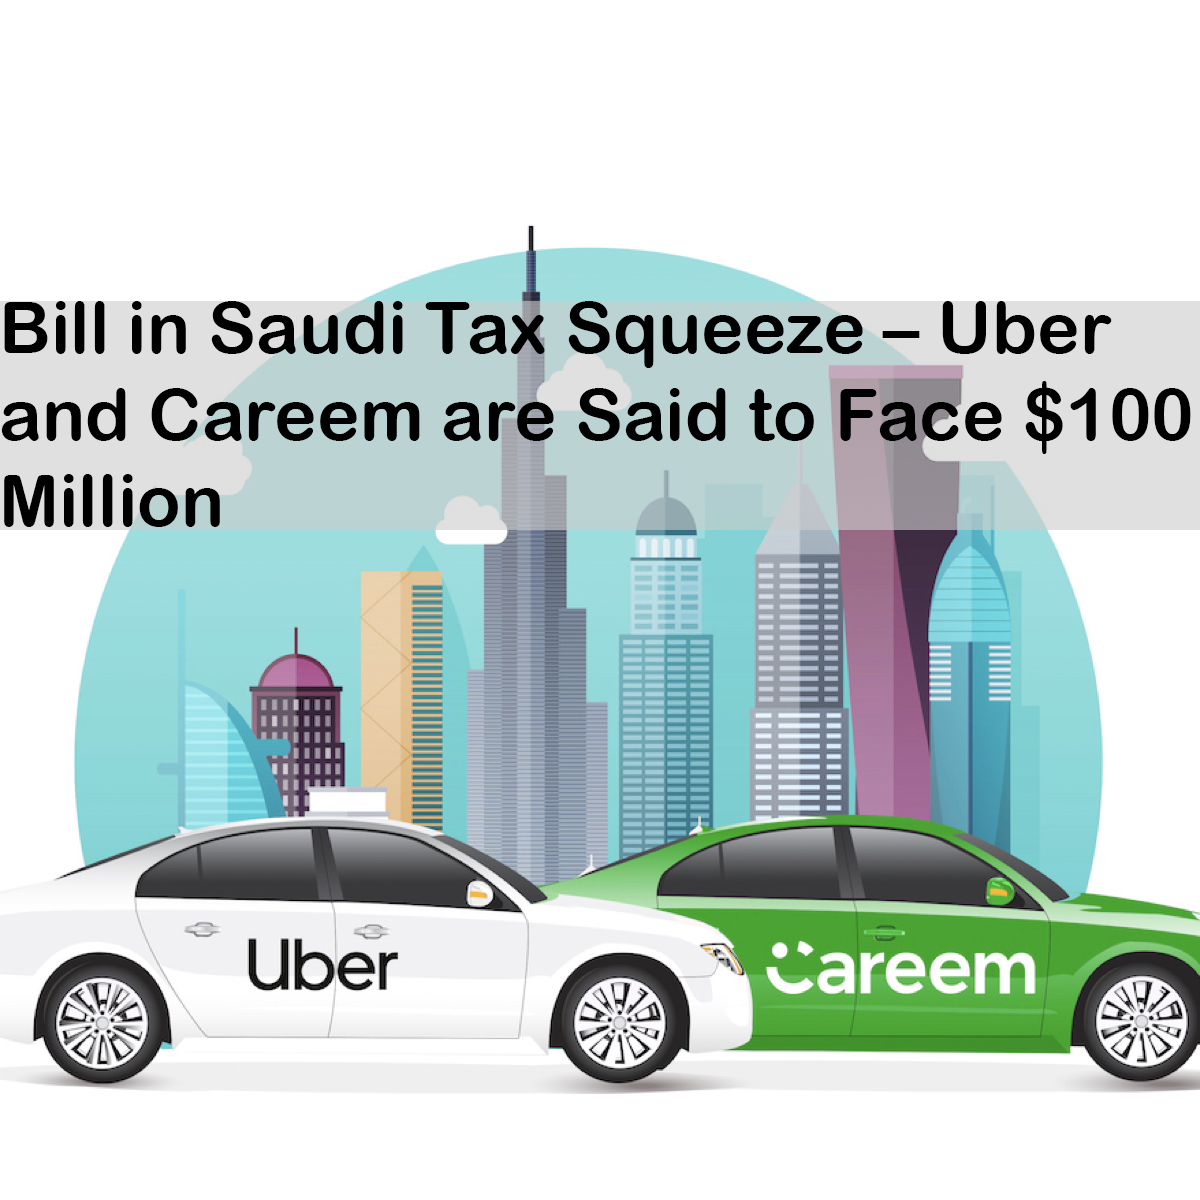 Bill in Saudi Tax Squeeze – Uber and Careem are Said to Face $100 Million